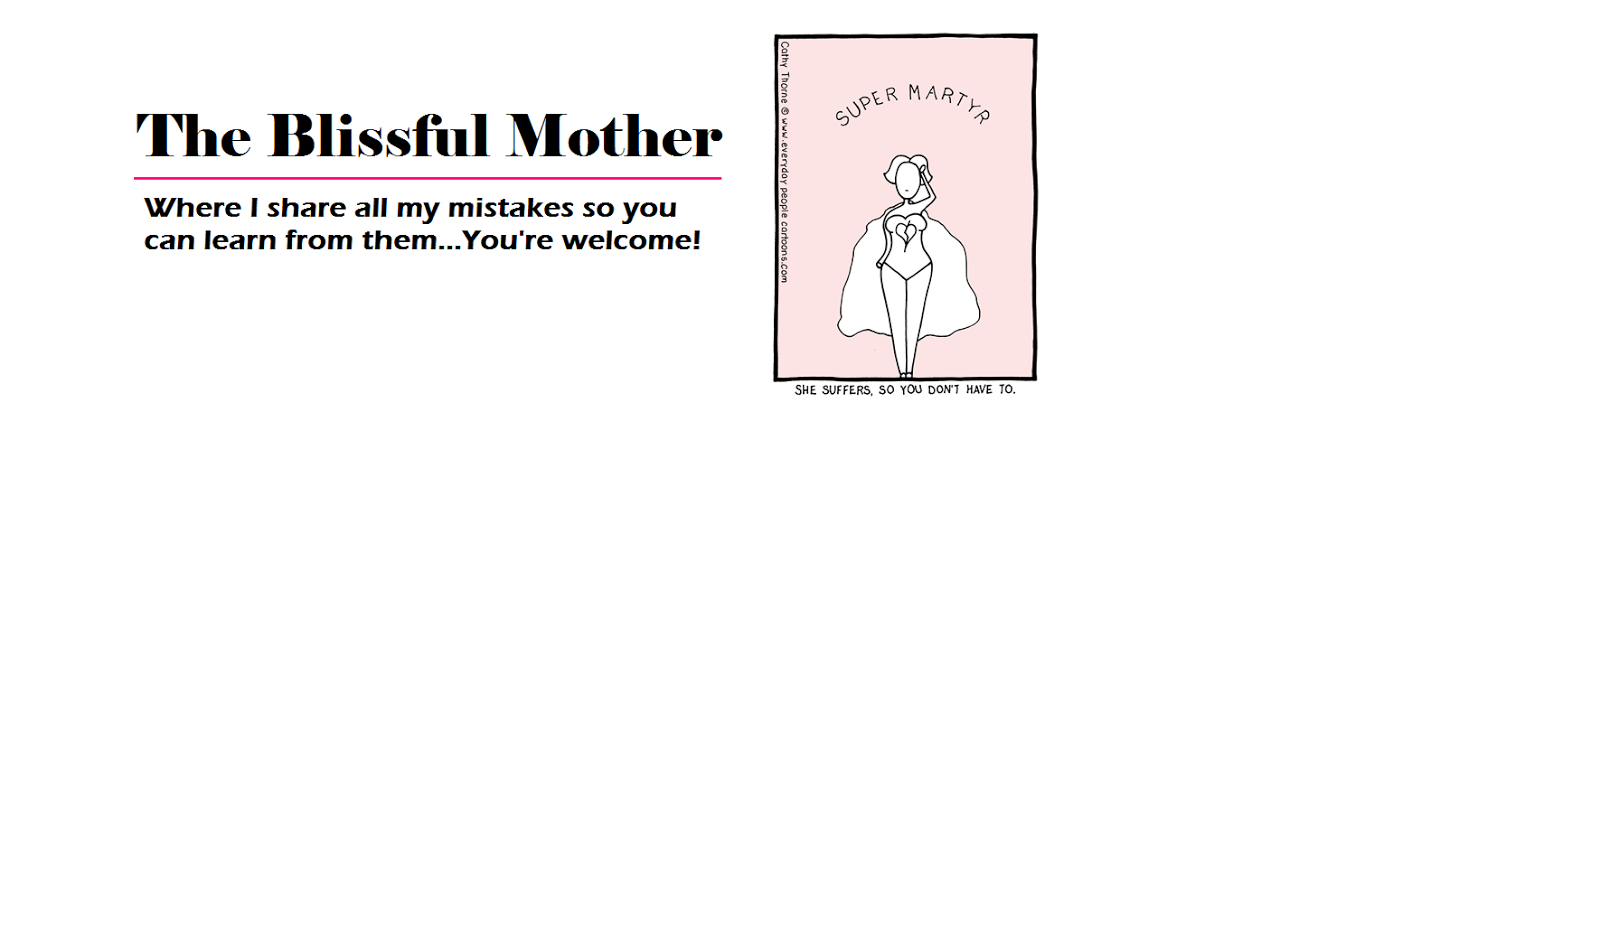 The Blissful Mother